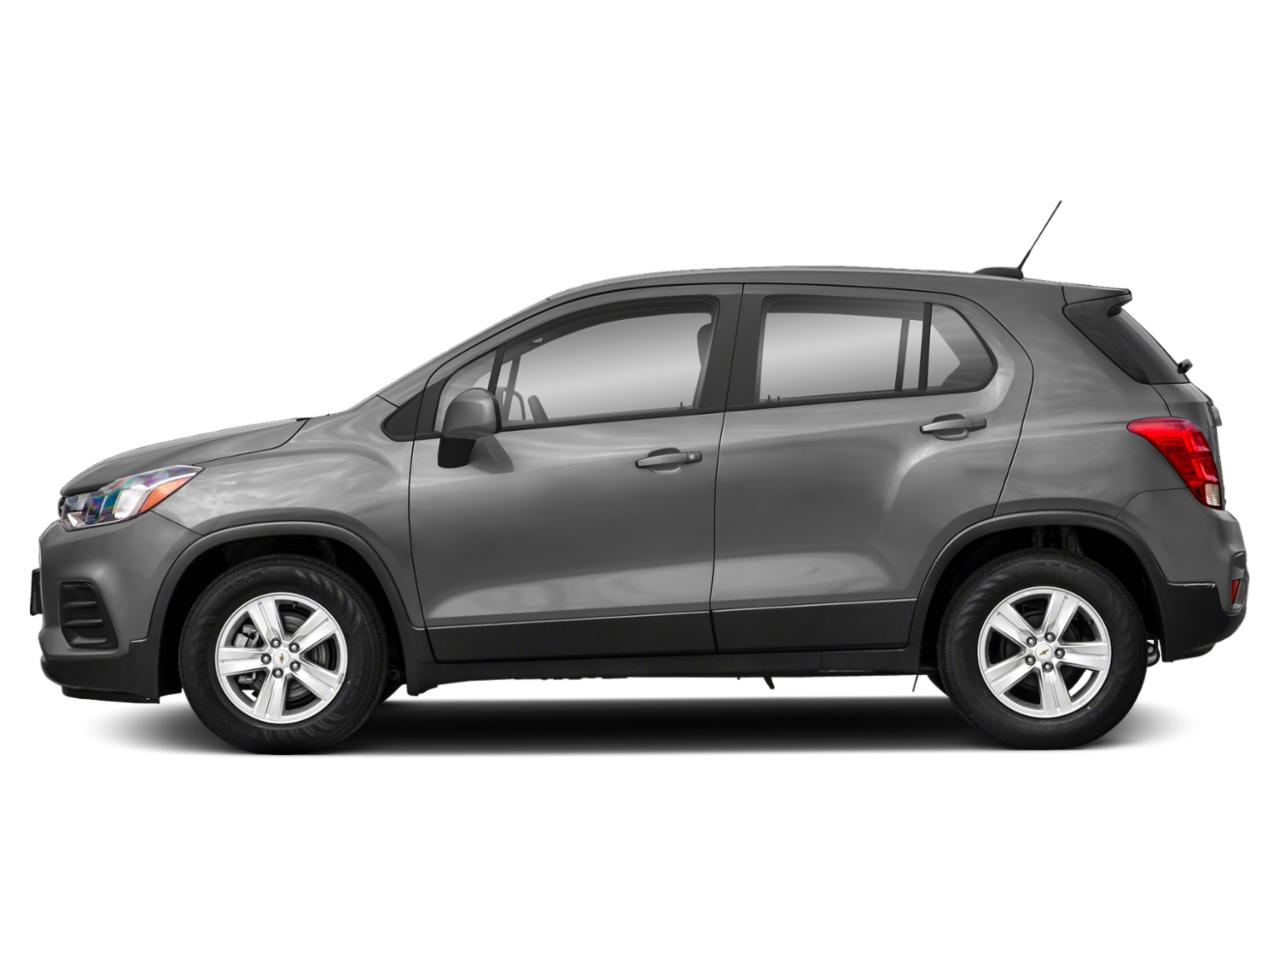 Used 2020 Chevrolet Trax LS with VIN 3GNCJKSB4LL280587 for sale in Republic, MO